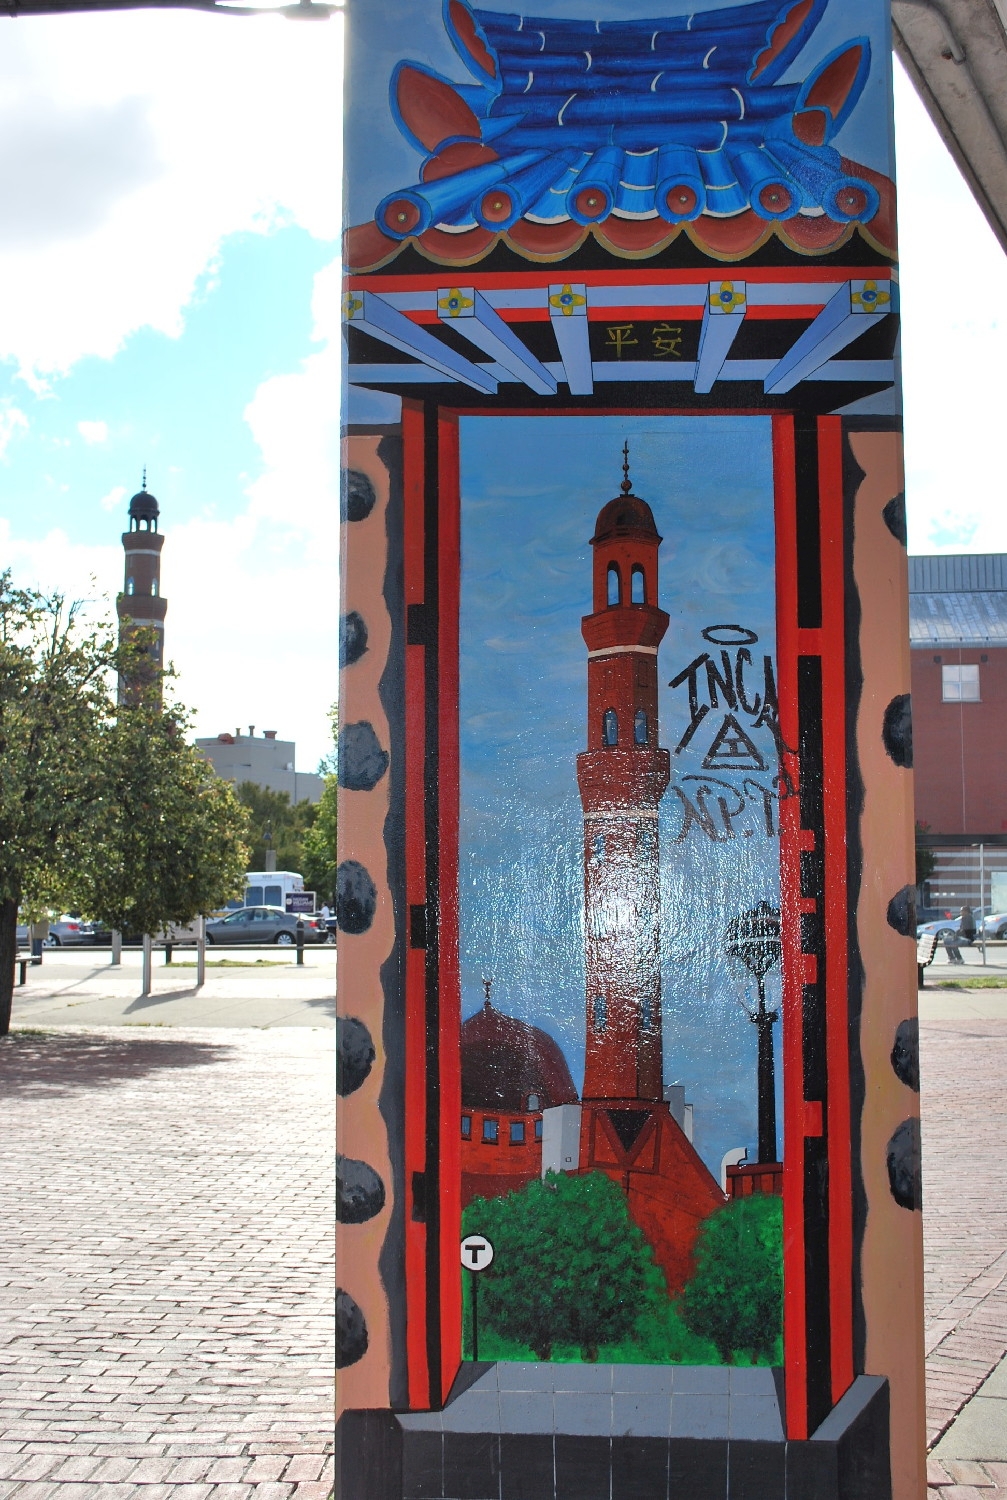 Mural of the Cultural Center at the neighboring Roxbury Crossing MBTA station, with the Center's minaret visible in the background